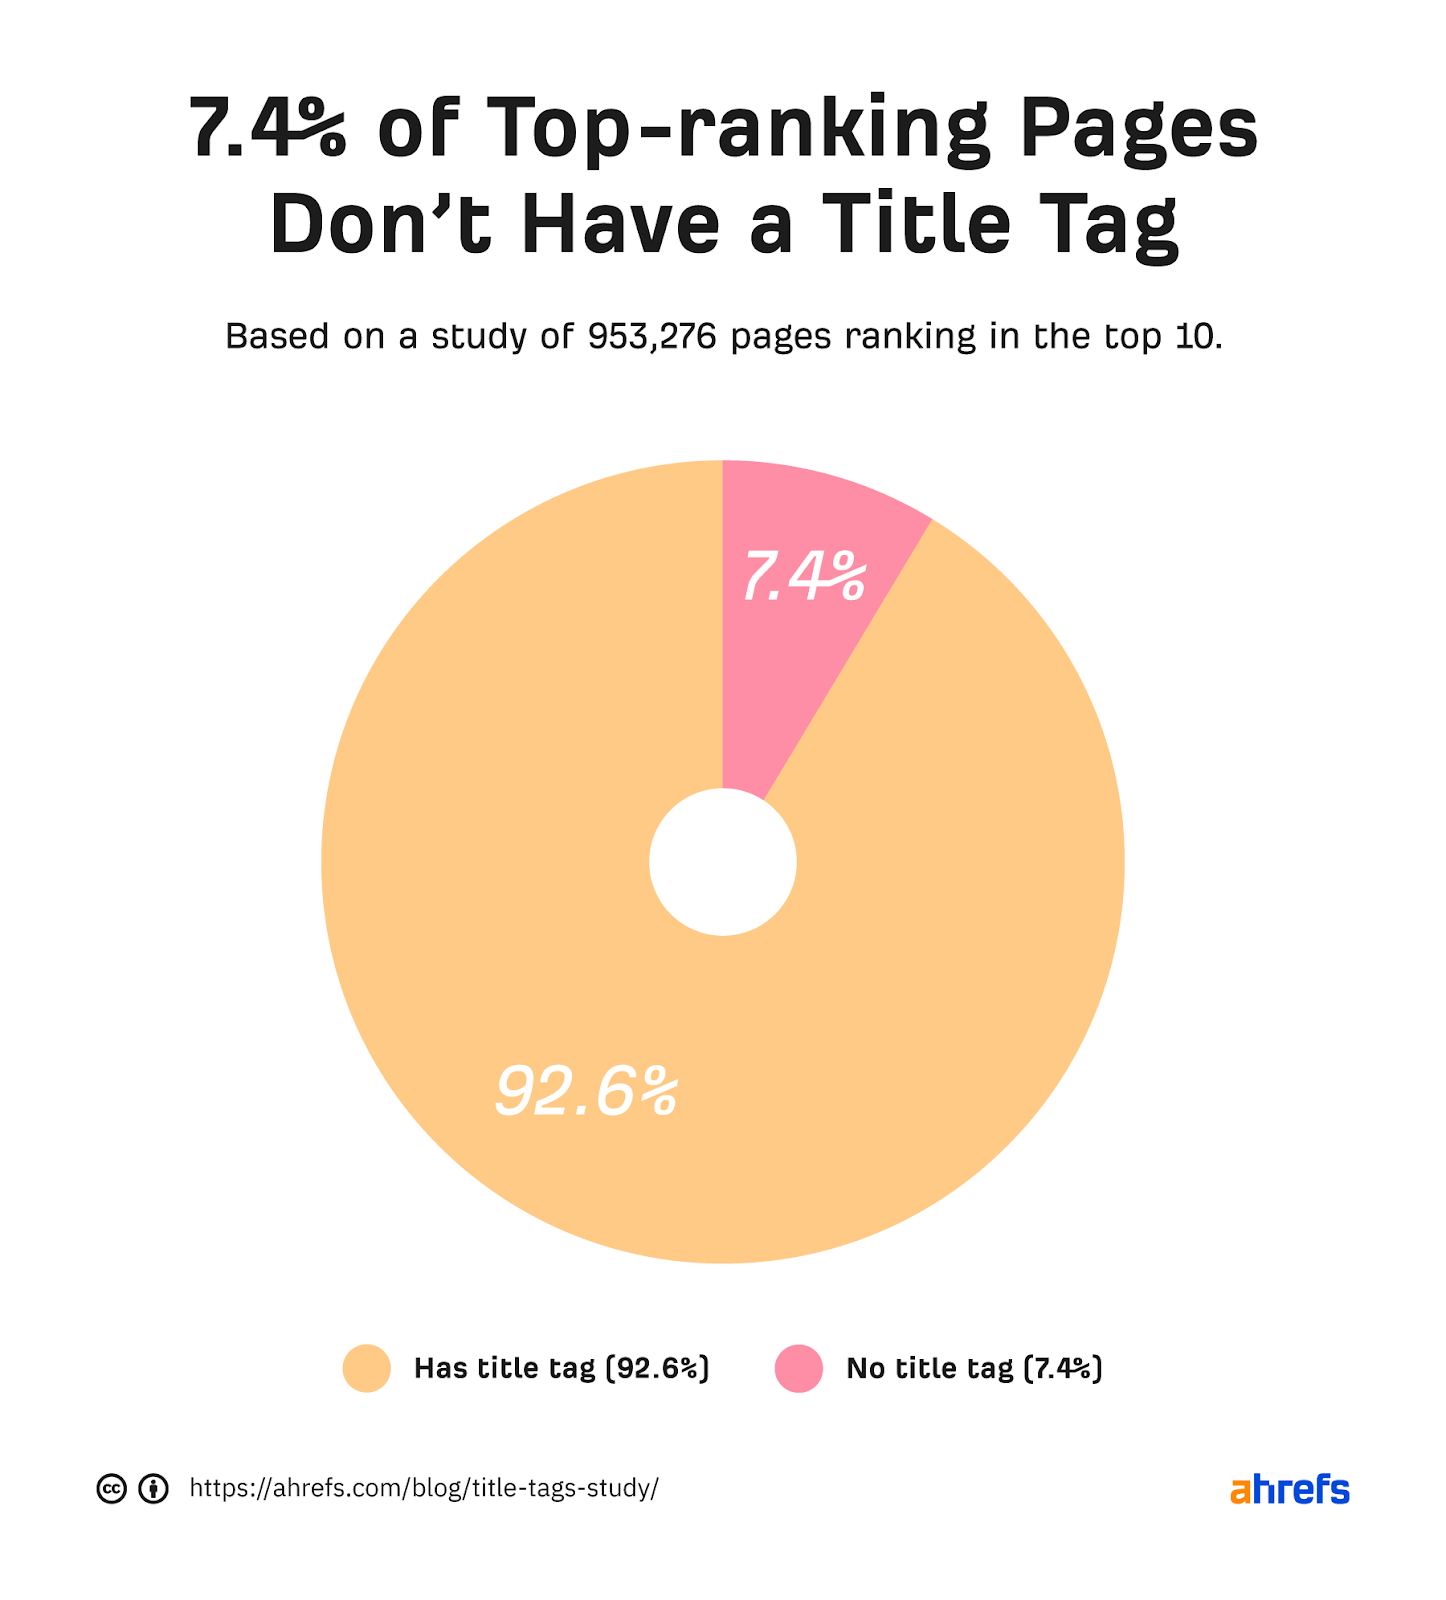 7.4% of top-ranking pages don't have a title tag